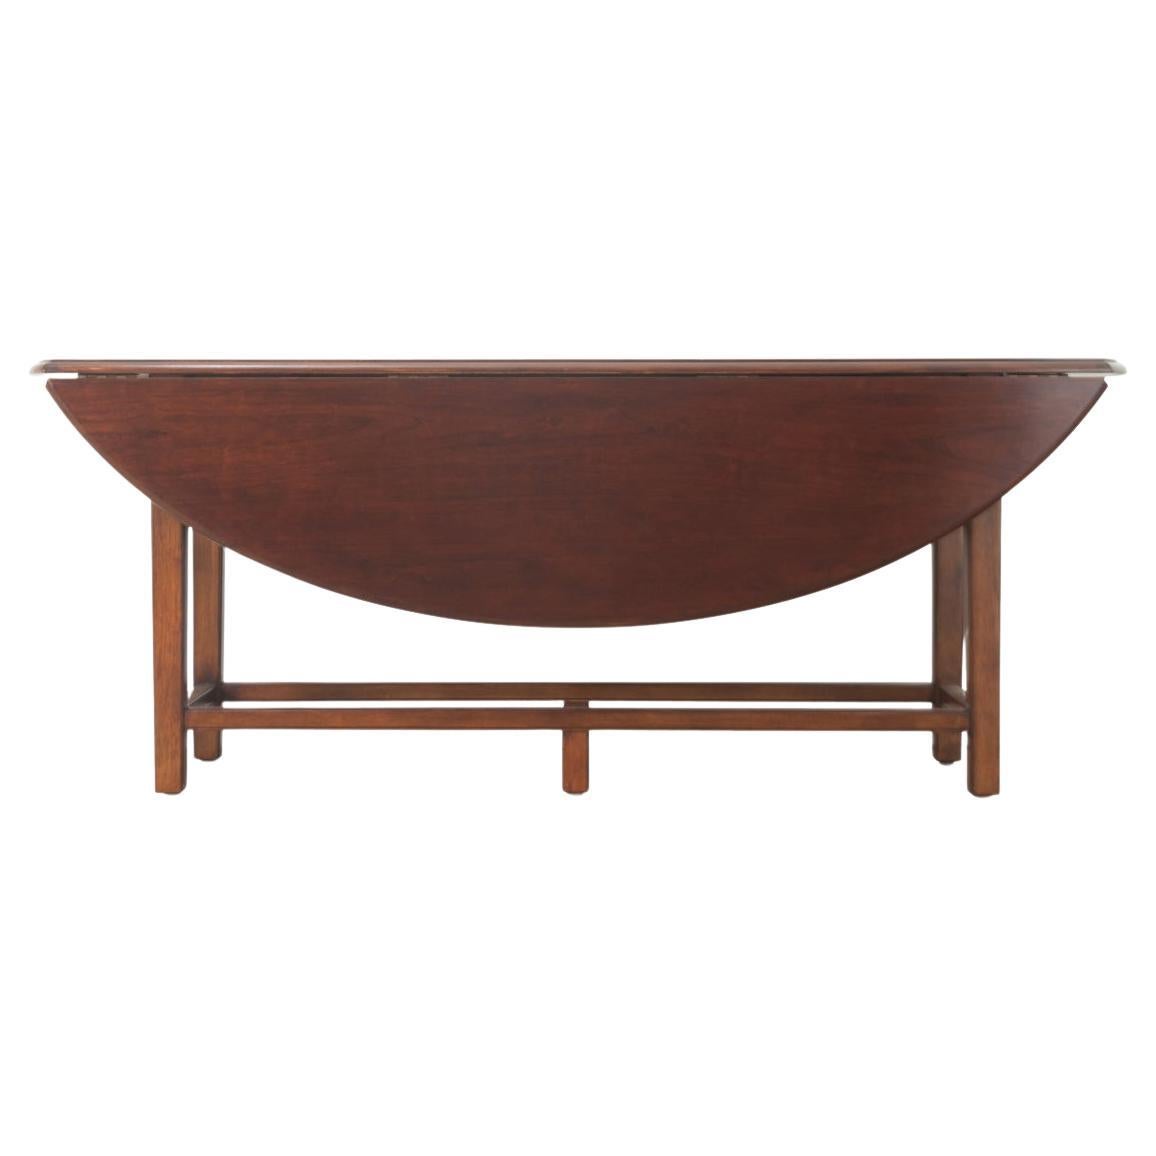 English Mahogany Drop Leaf Oval Dining Table For Sale